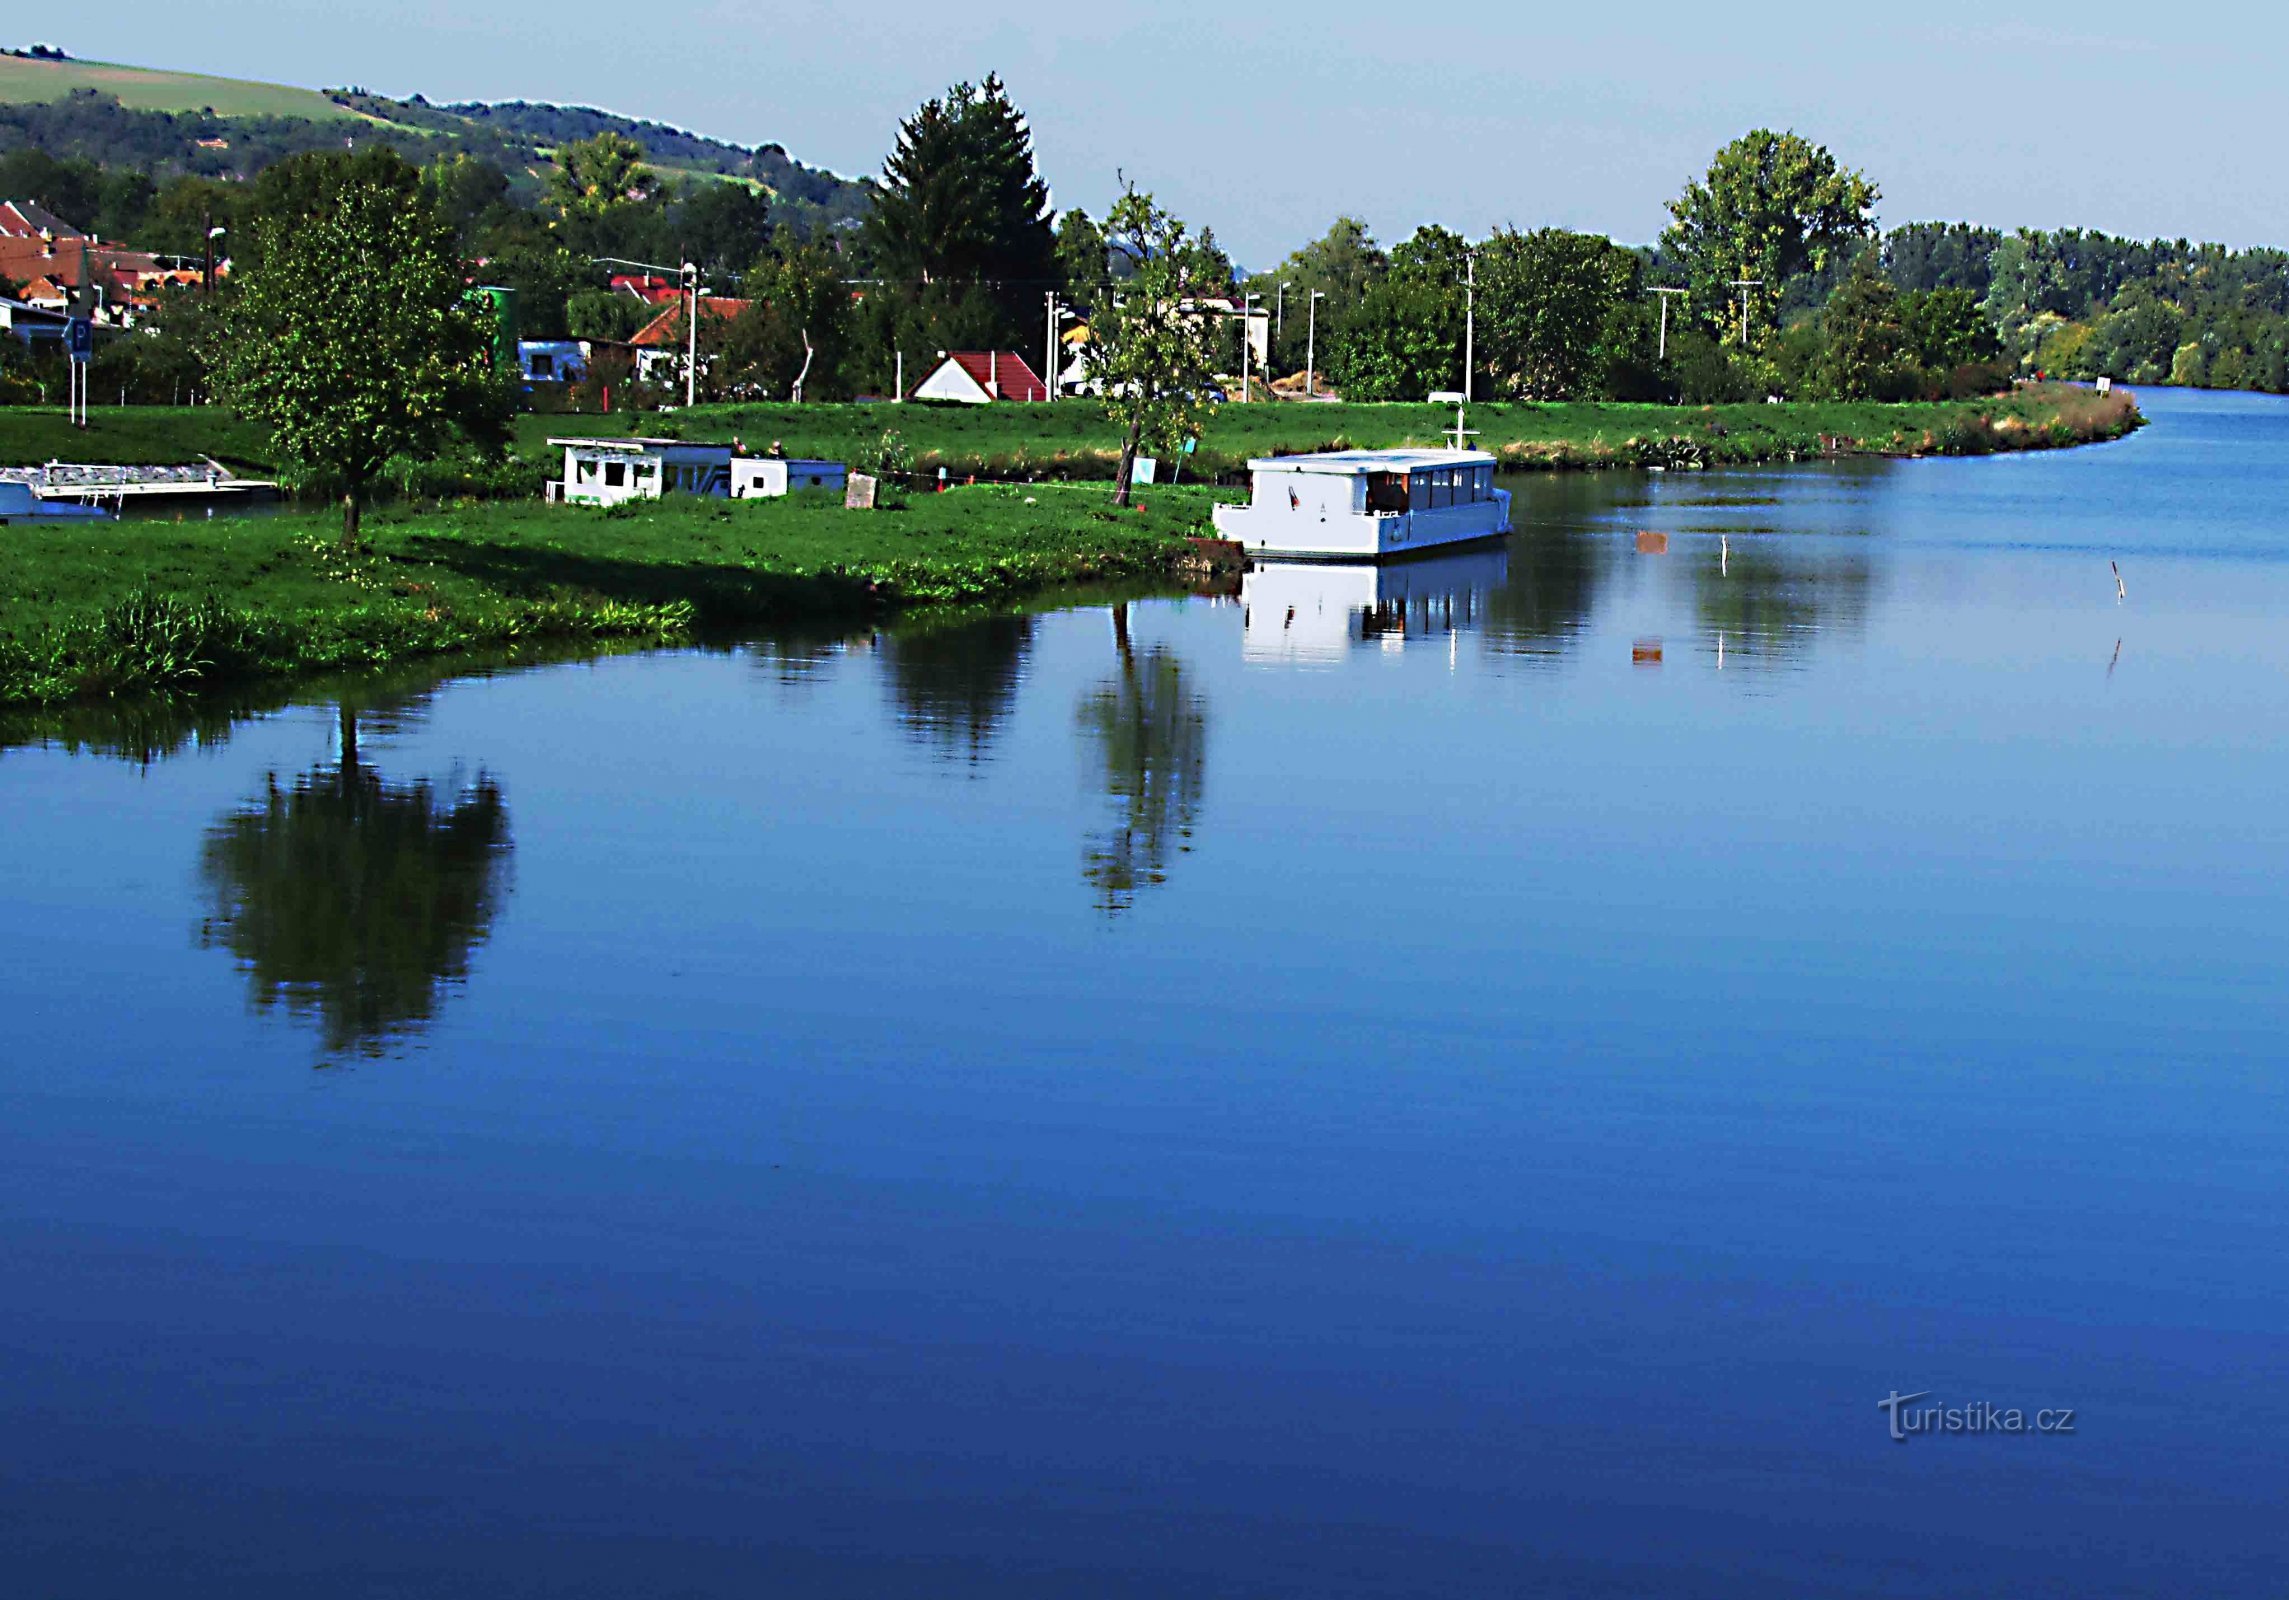 Bať's canal and wharf in Spytihnev